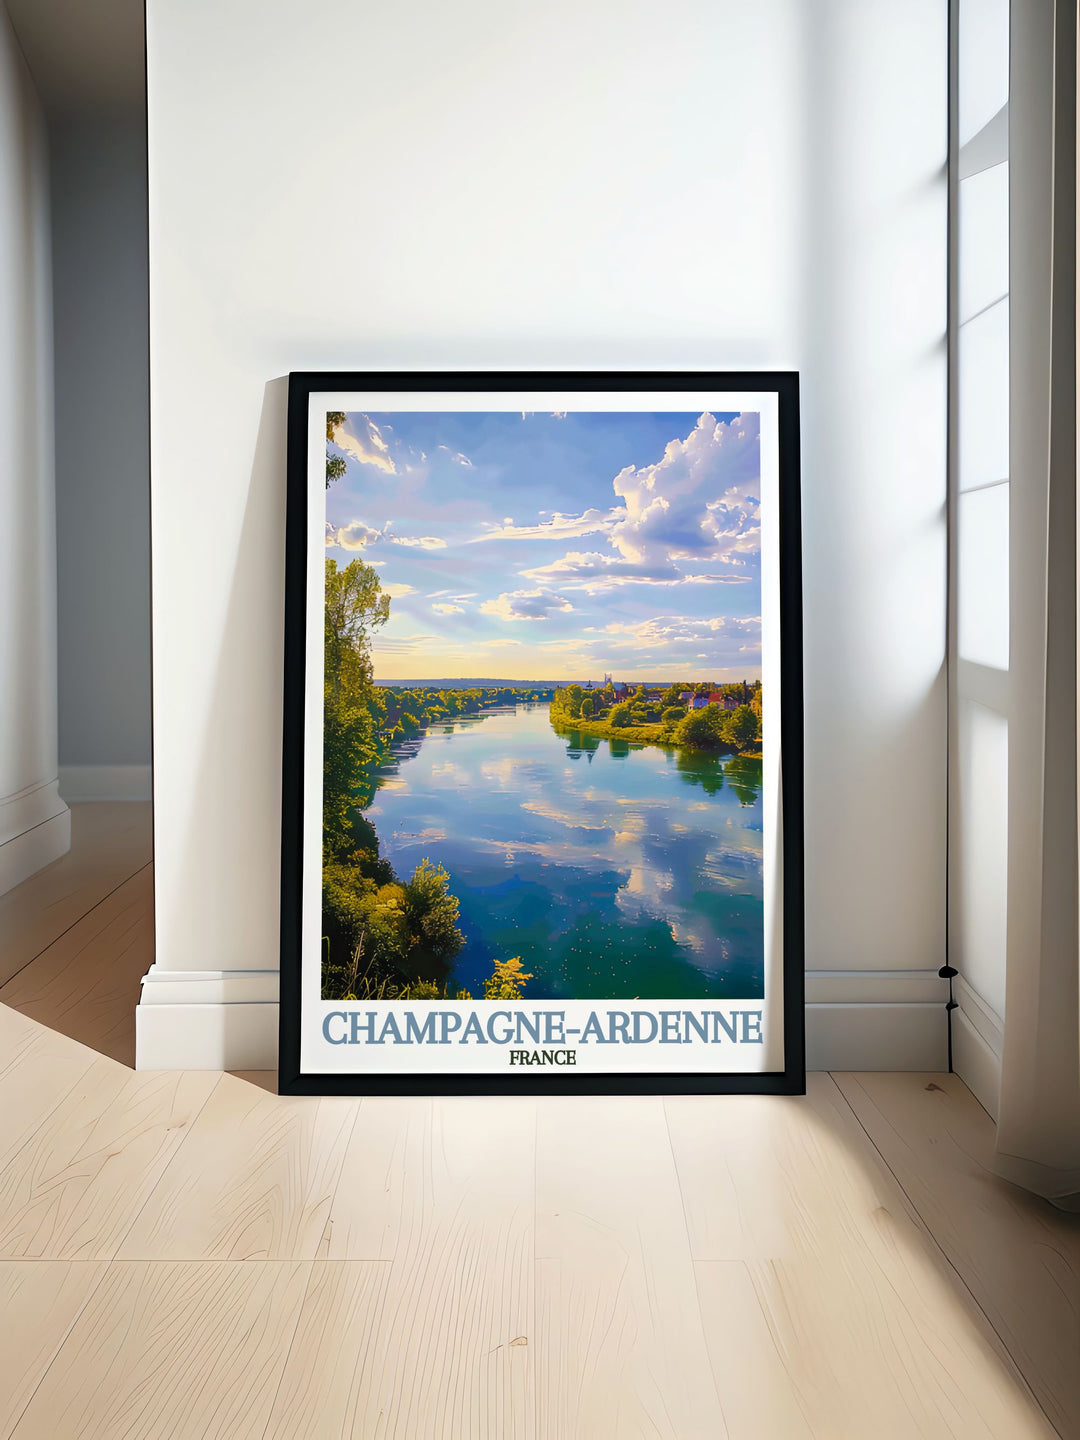 Stunning travel print of the Marne River in France showcasing lush vineyards and charming villages. Perfect for wall art or gifts, this poster captures the serene beauty of Champagne Ardenne with exquisite detail and vibrant colors, ideal for home decor.